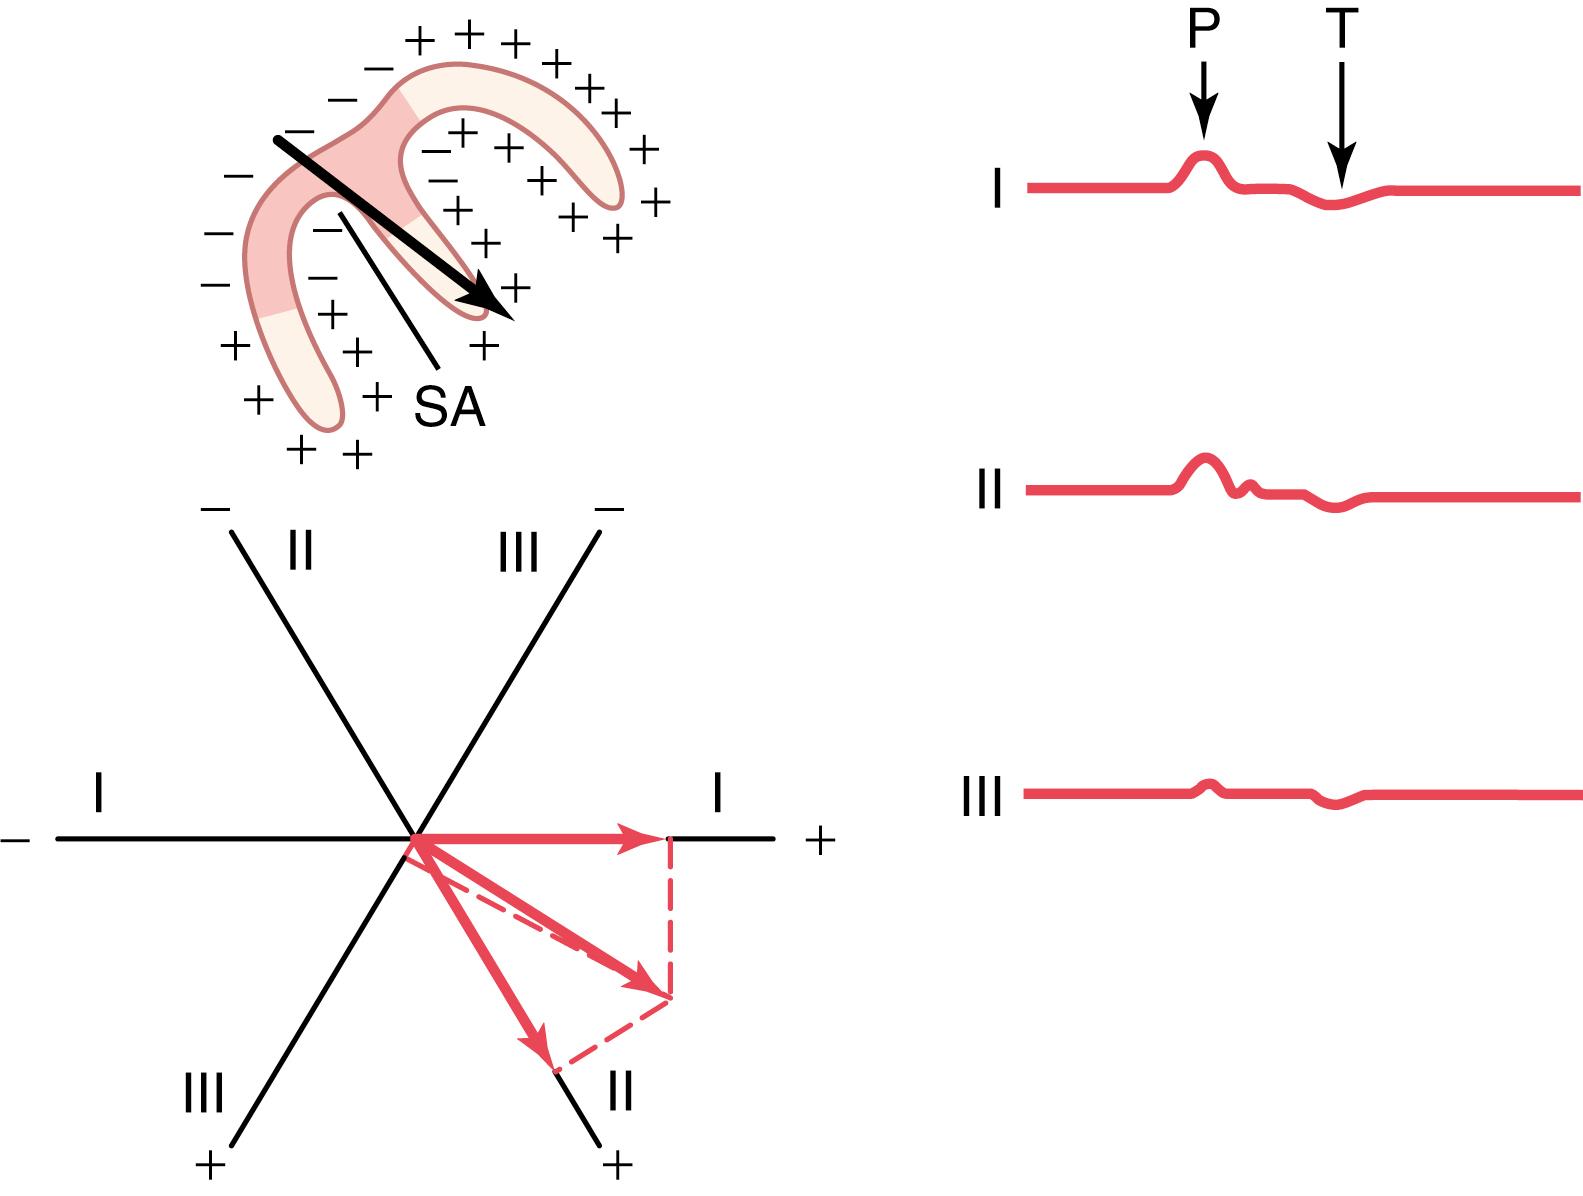 Figure 12-9, Depolarization of the atria and generation of the P wave showing the maximum vector through the atria and the resultant vectors in the three standard leads. At the right are the atrial P and T waves. SA, Sinoatrial node.